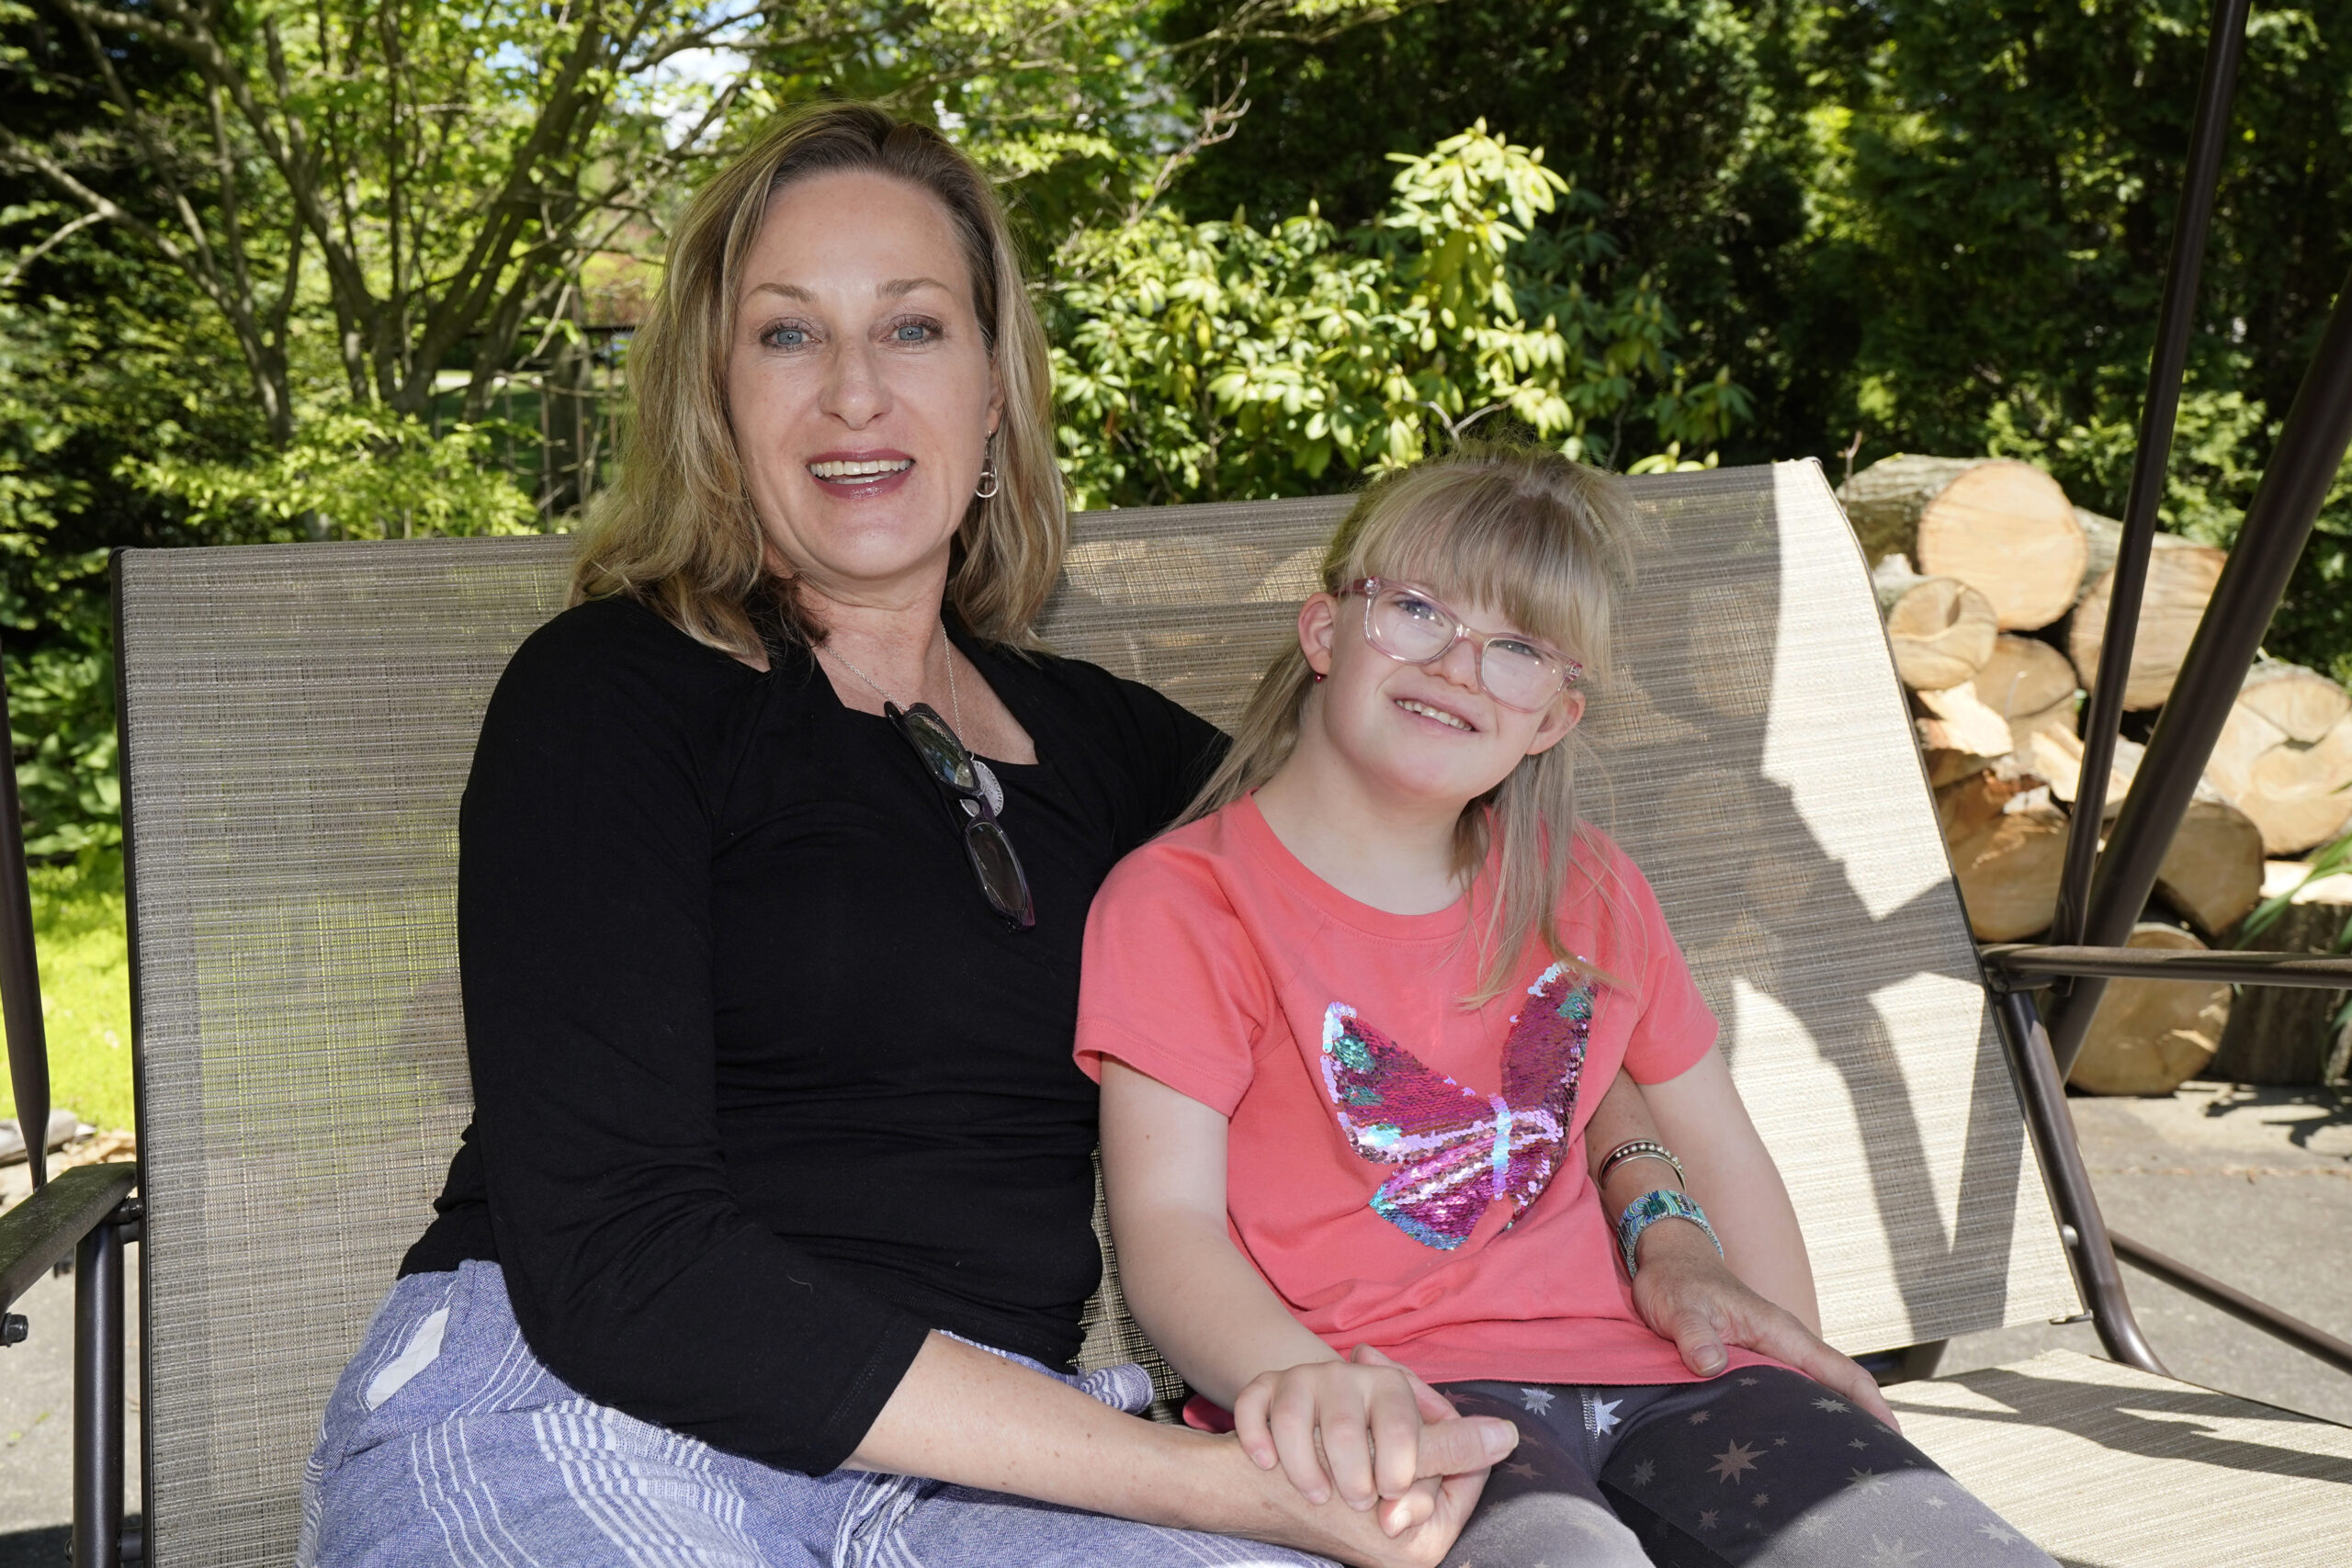 Holly Christensen, left, sits in a swing with her daughter, Lyra, Thursday, May 13, 2021, in Akron, Ohio. Anti-abortion activists say 2021 has been a breakthrough year for legislation in several states seeking to prohibit abortions based on a prenatal diagnosis of Down syndrome. Opponents of the bills, including some parents with children who have Down syndrome like Holly, argue that elected officials should not be meddling with a woman’s deeply personal decision on whether to carry a pregnancy to term after a Down syndrome diagnosis. (AP Photo/Tony Dejak)